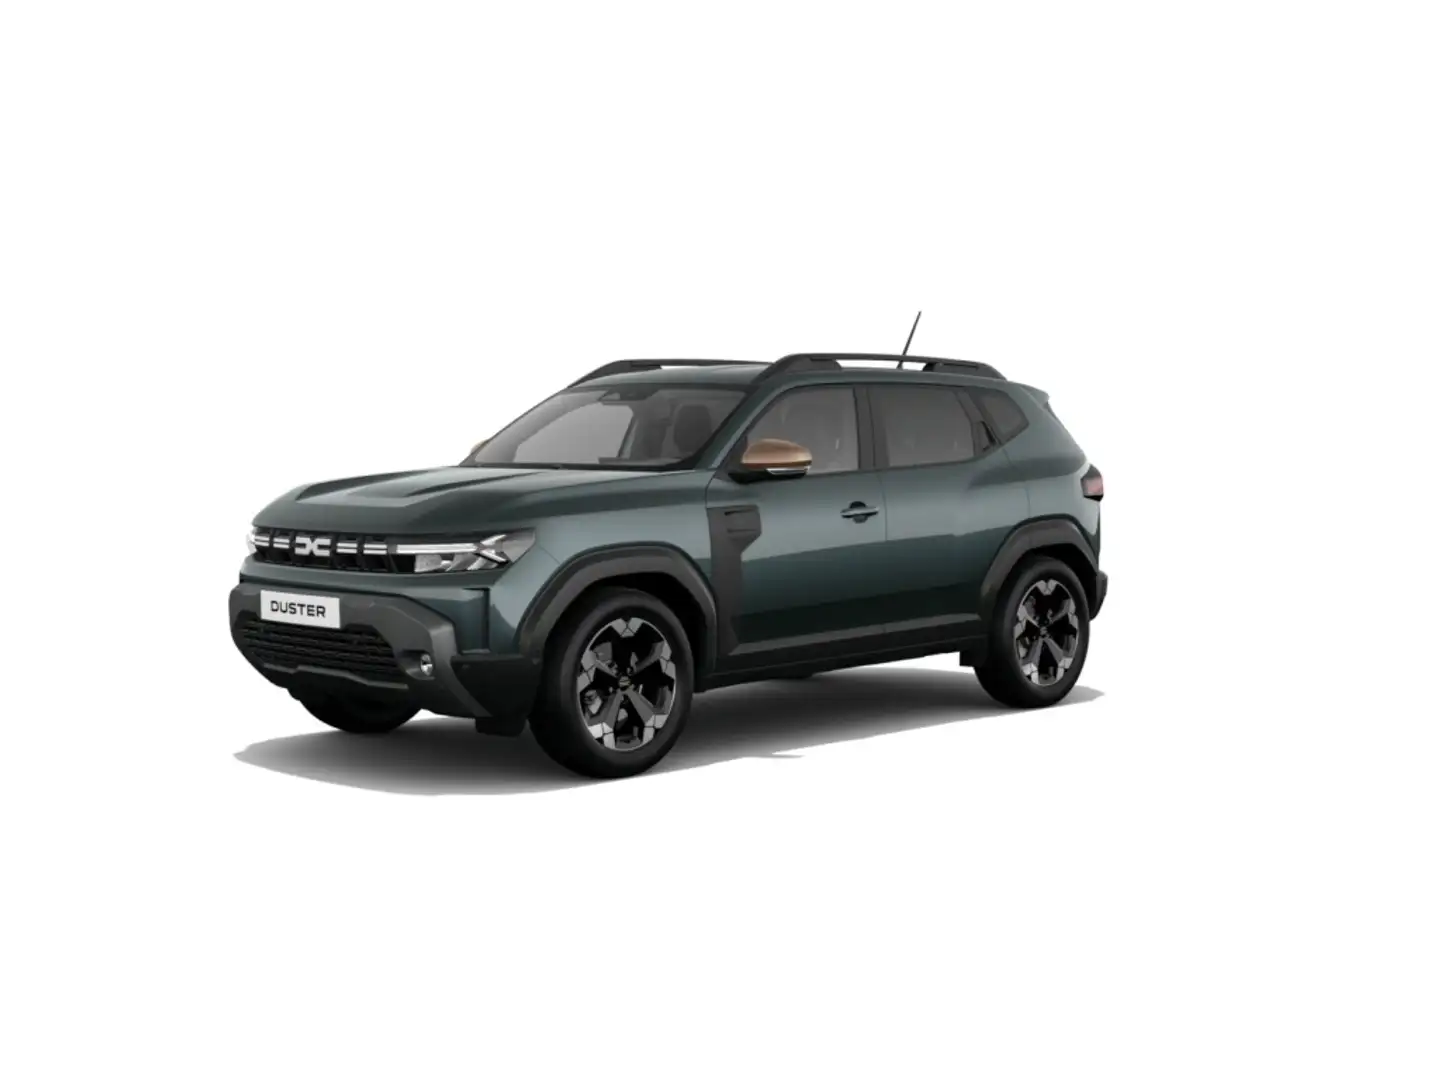 Dacia Duster 1.2 TCe Extreme 4x4 96kW 48v Vert - 1